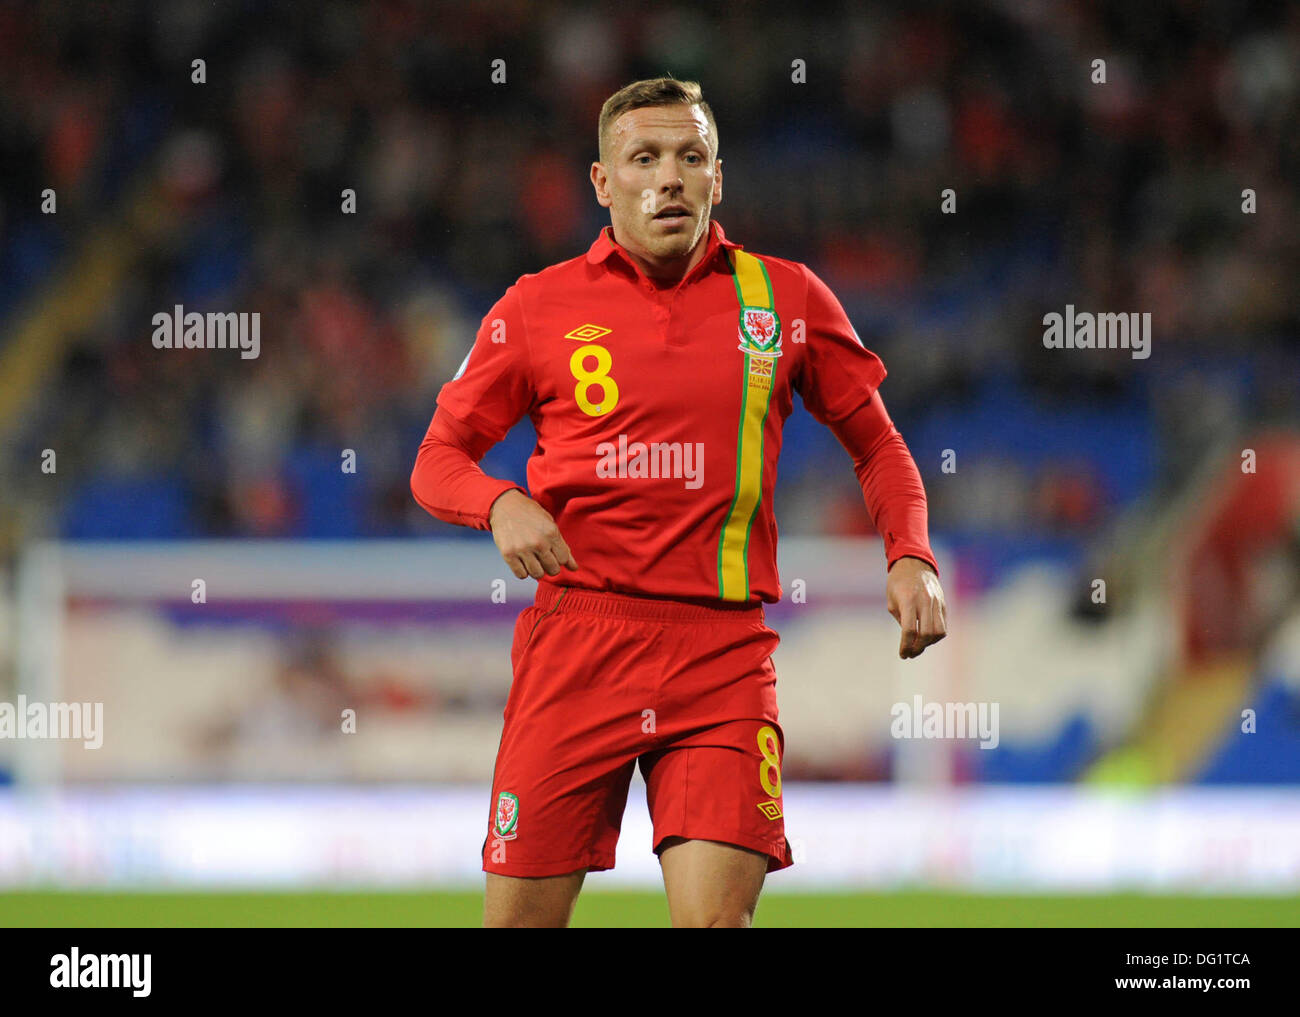 Cardiff, Wales, UK. 11th Oct, 2013. FIFA 2014 World Cup Qualifying Match - Wales v Macedonia at the Cardiff City Stadium : Craig Bellamy playing his last home game for Wales. Credit:  Phil Rees/Alamy Live News Stock Photo